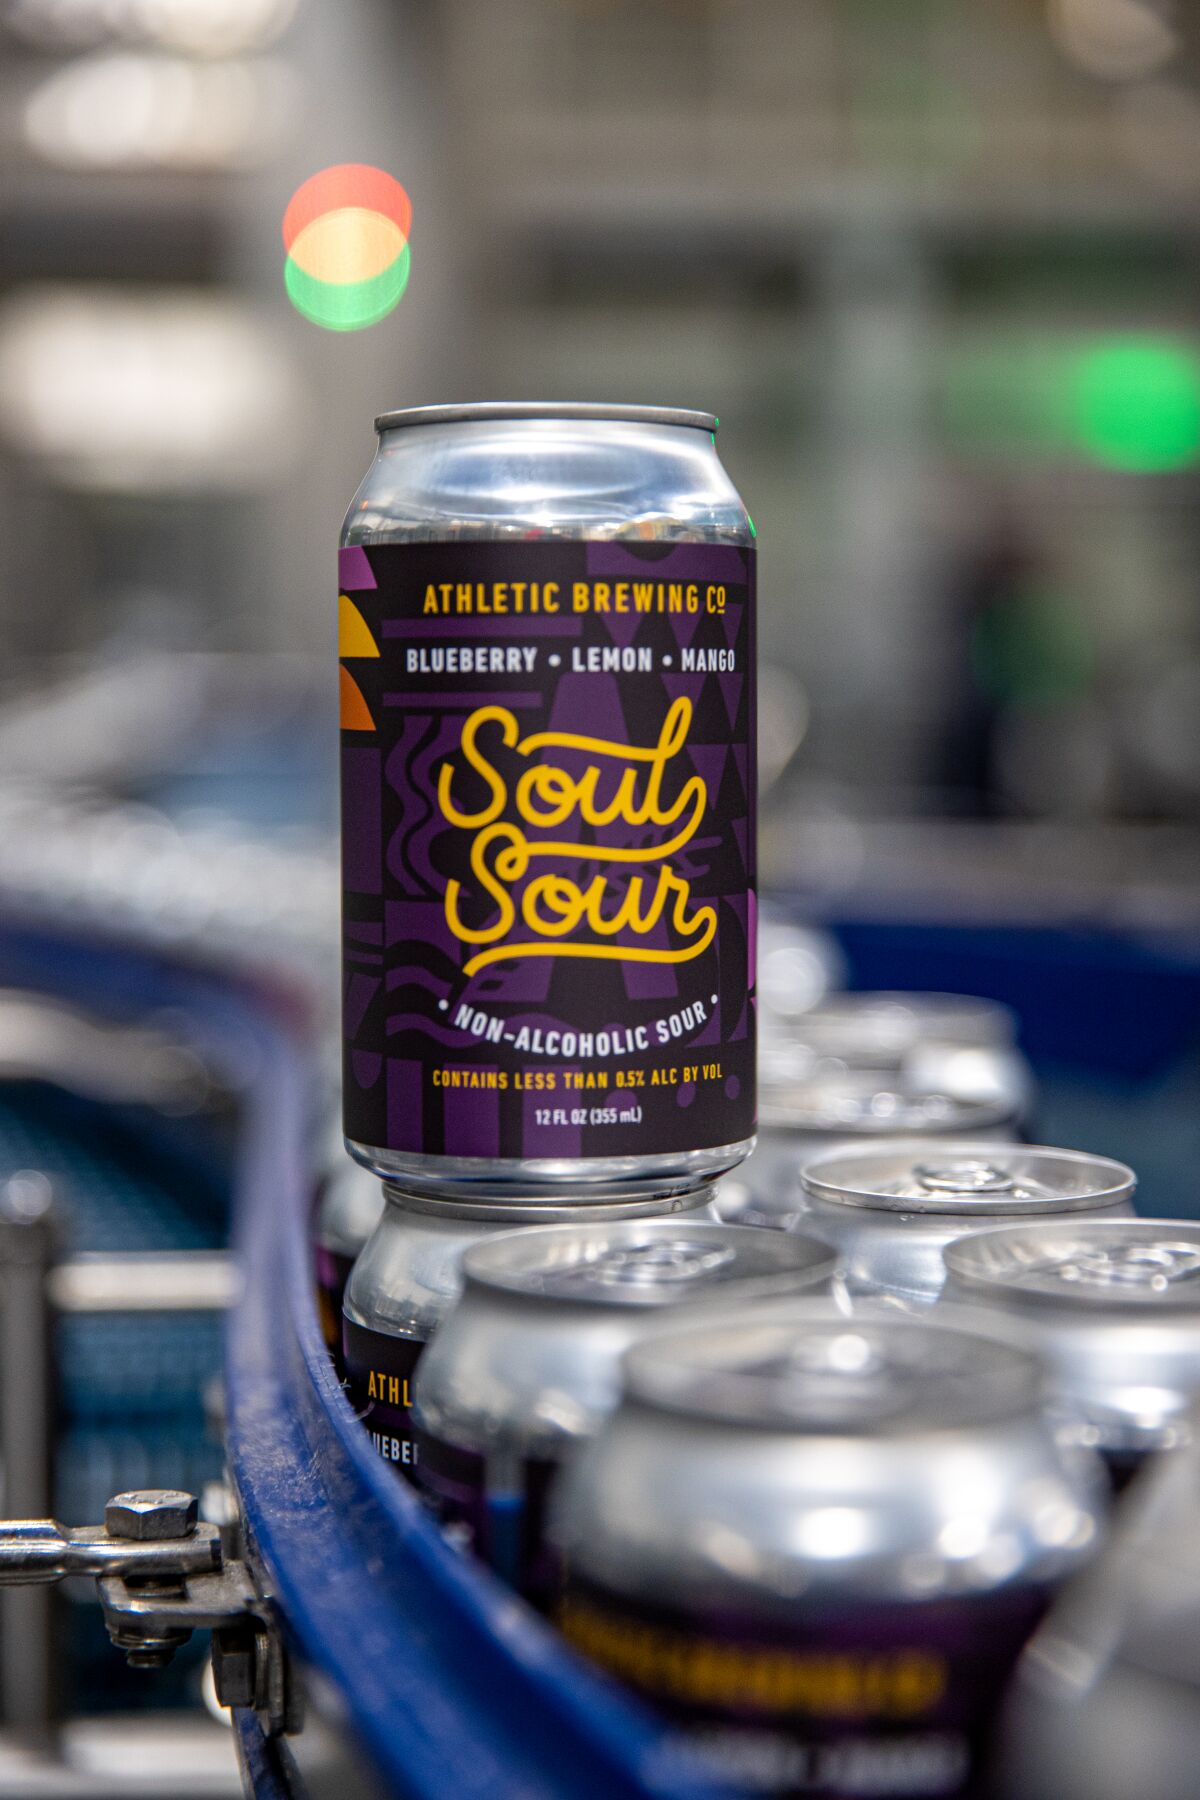 Soul Soul from Athletic Brewing Company